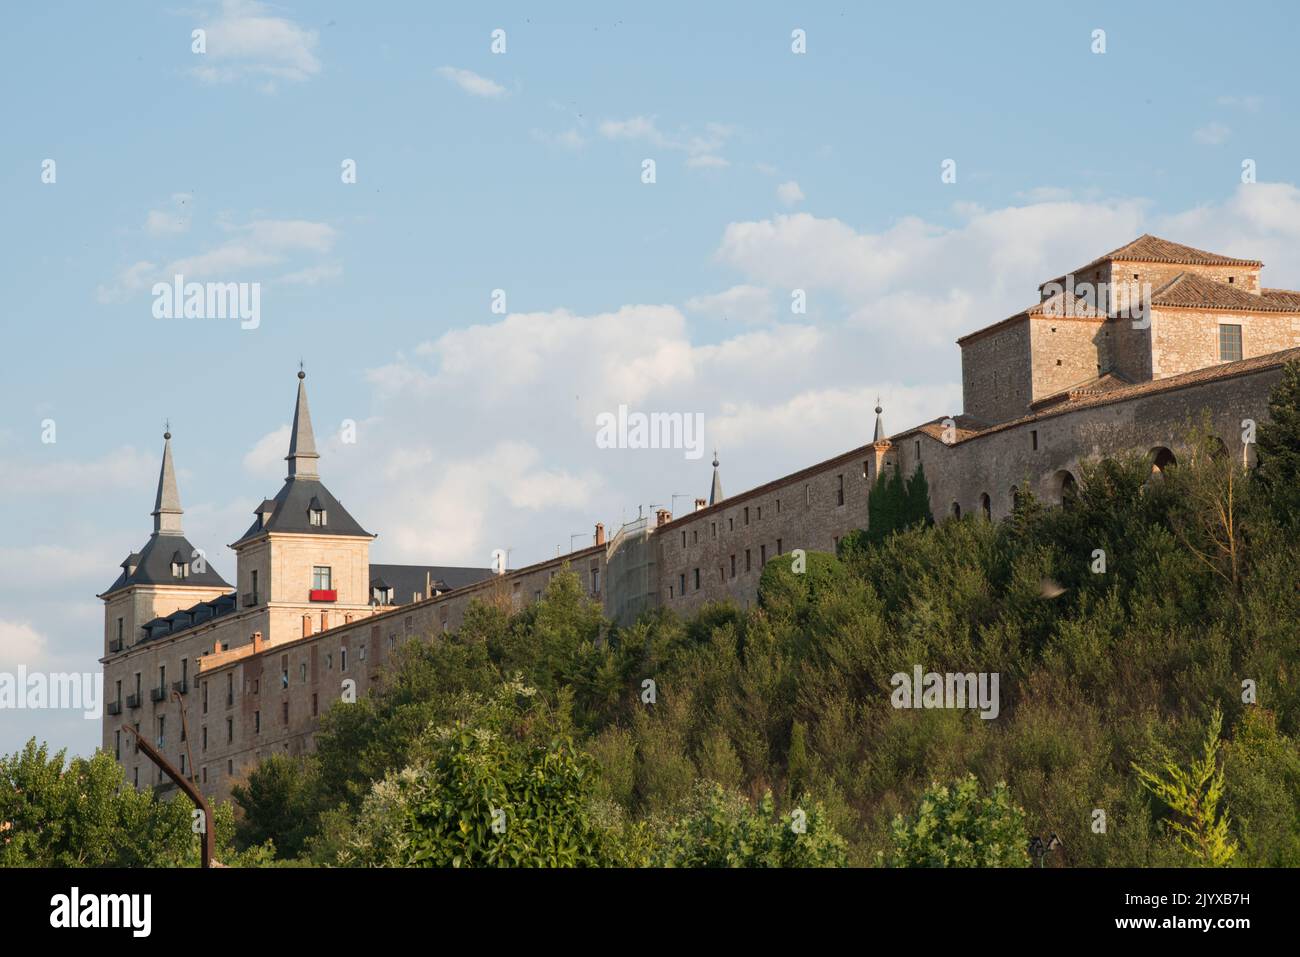 Facade of the ducal Palace at Lerma. View from the bridge. Burgos Stock Photo